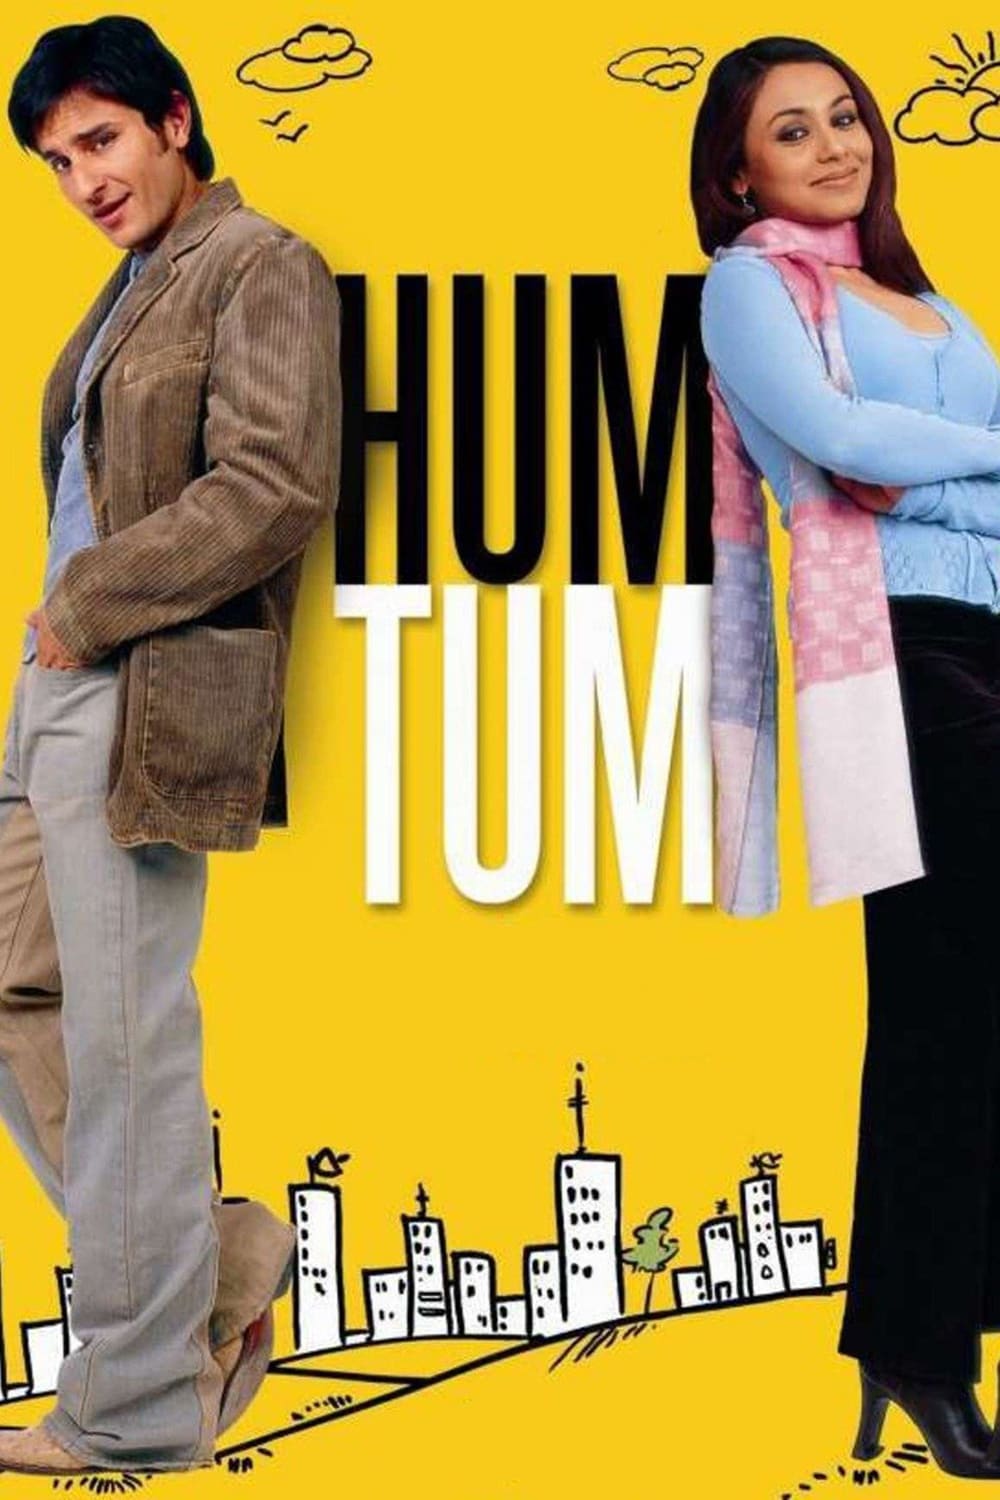 Poster for the movie "Hum Tum"